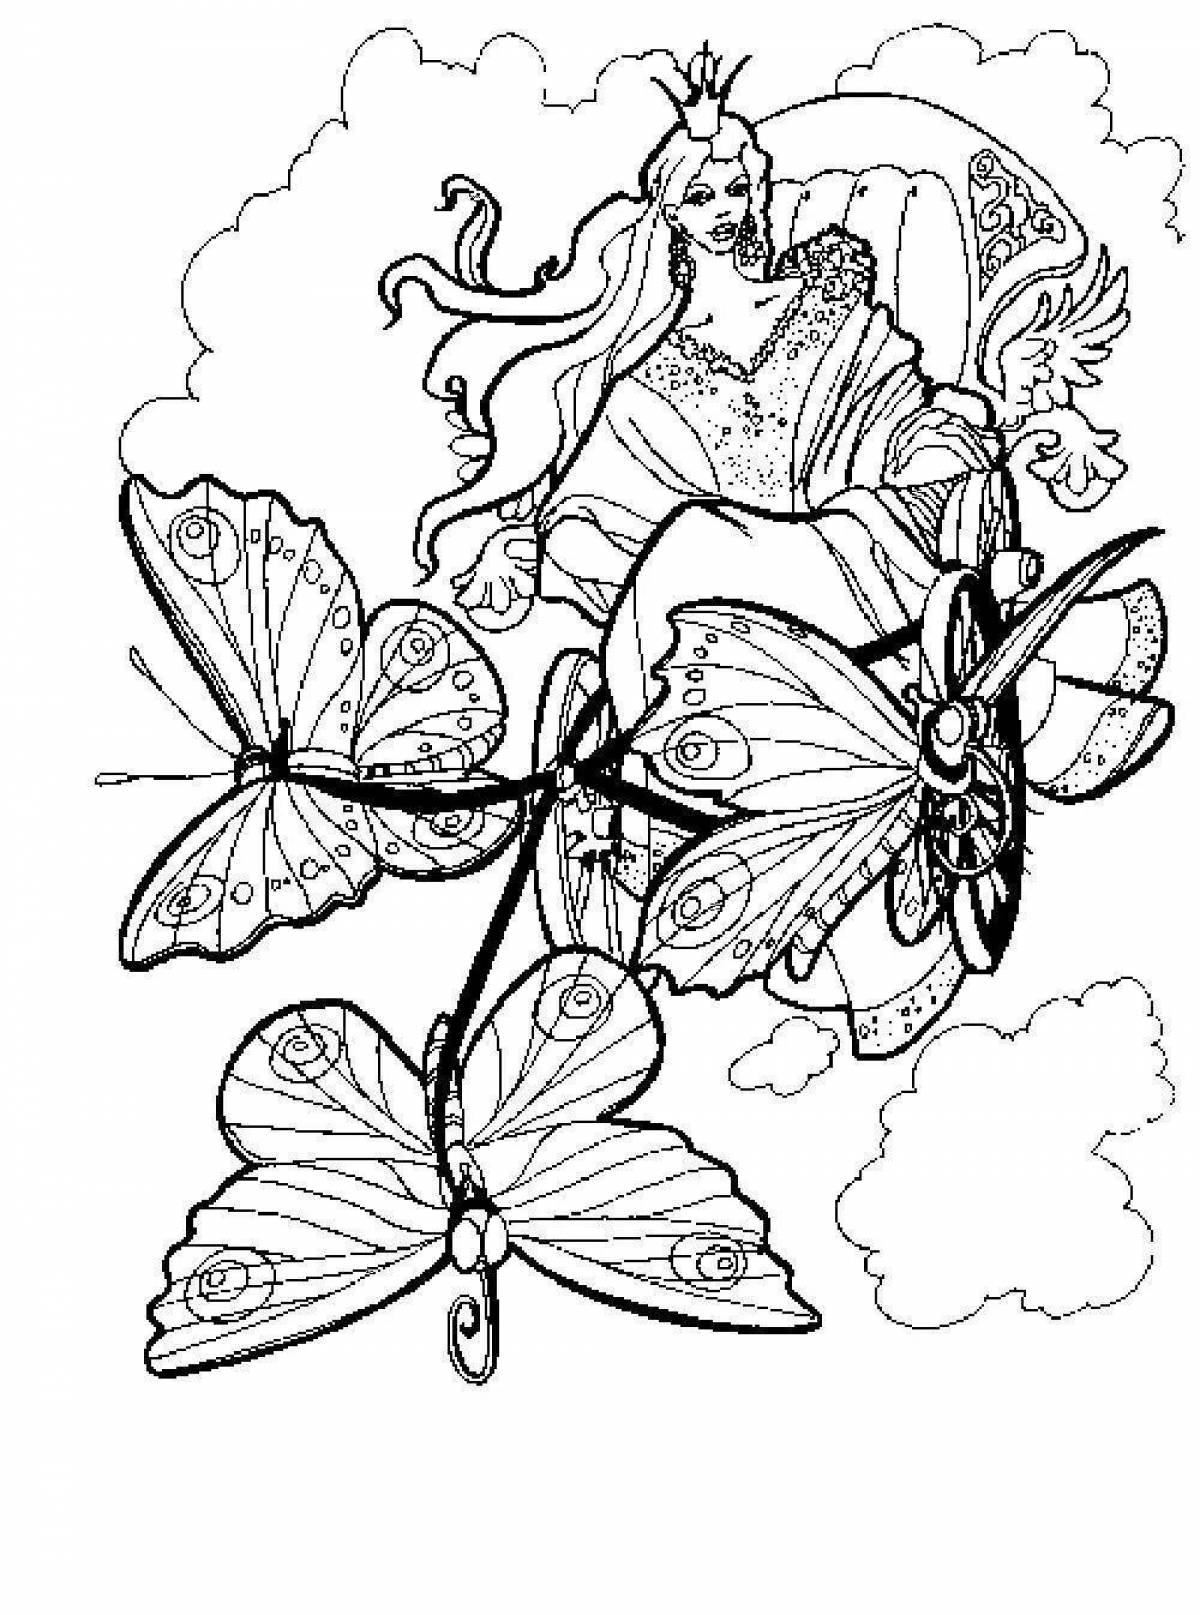 Fancy forest fairy coloring page